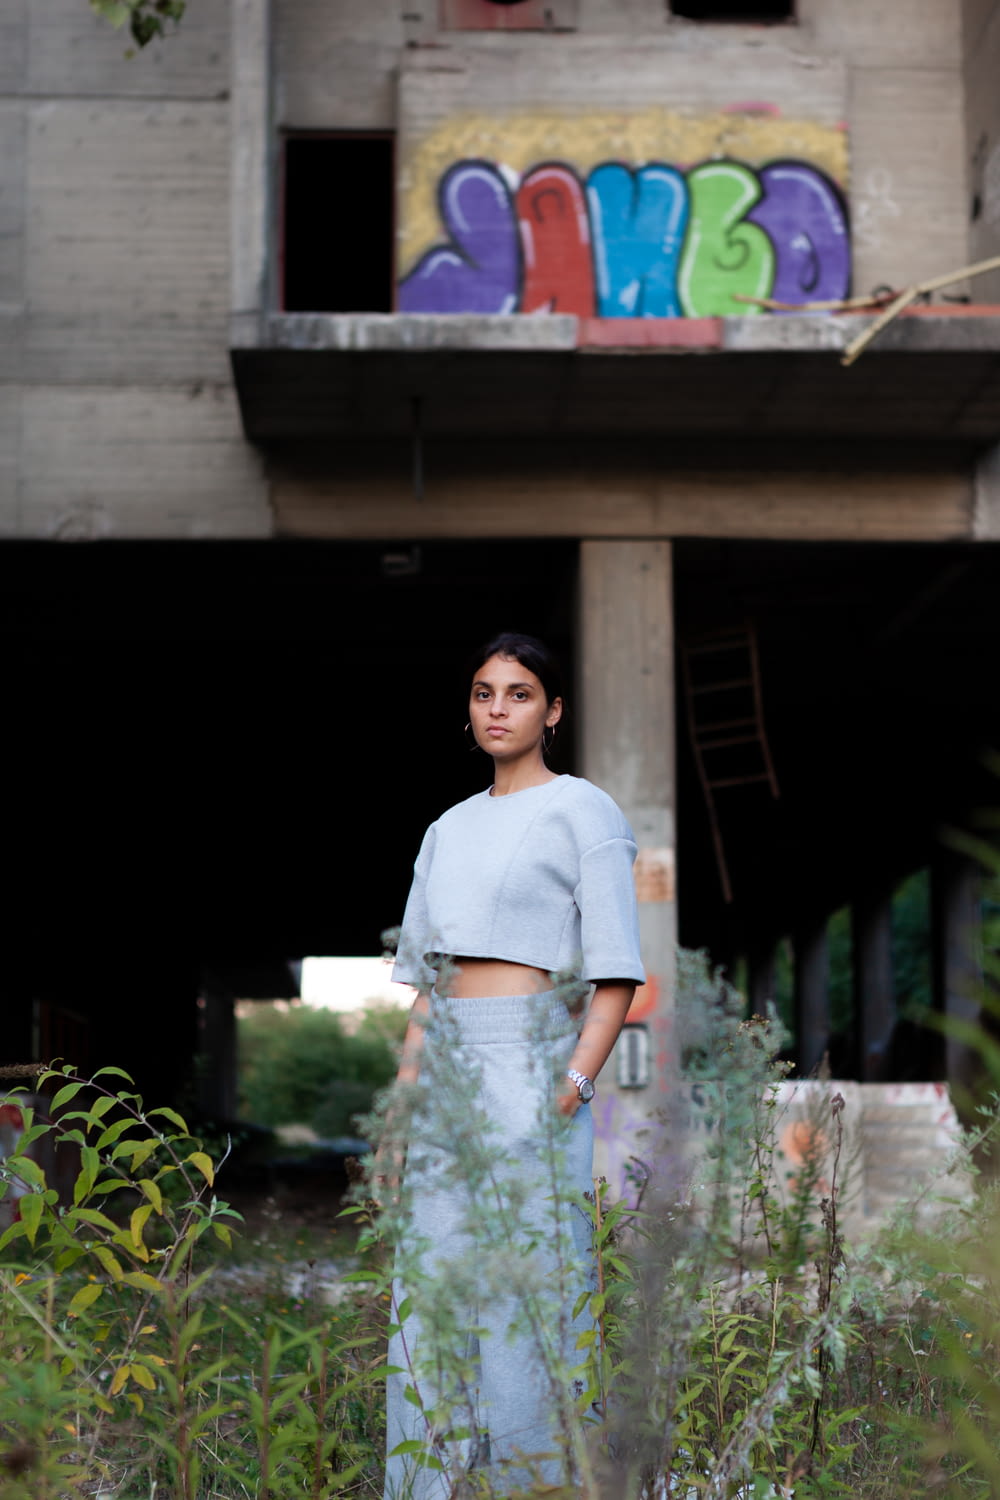 woman in white crew neck t-shirt standing near green plants during daytime